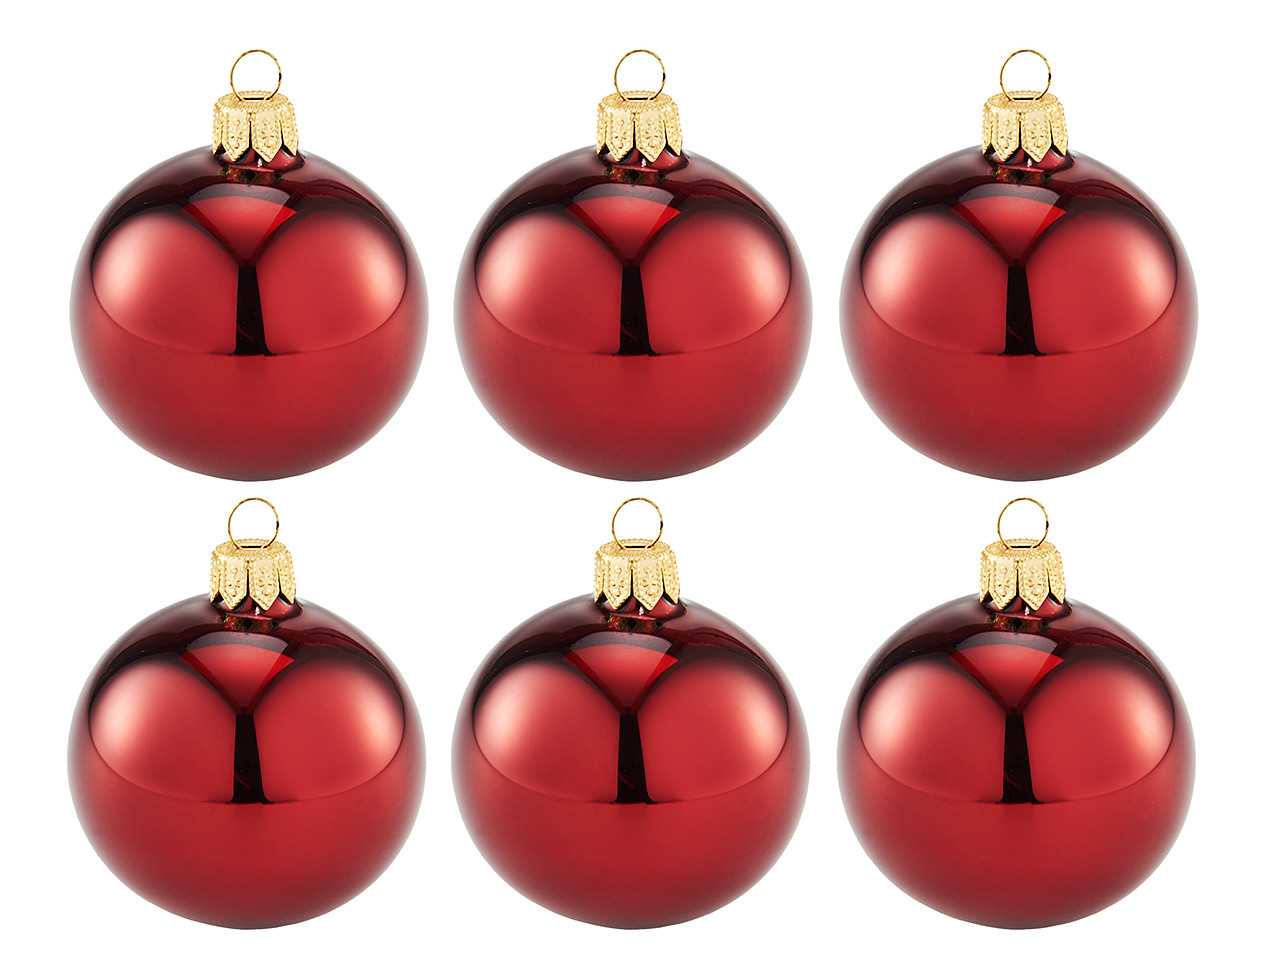 In-Store Only - 60 mm Burgundy Shiny Glass Christmas Ball Ornaments, Set of 6